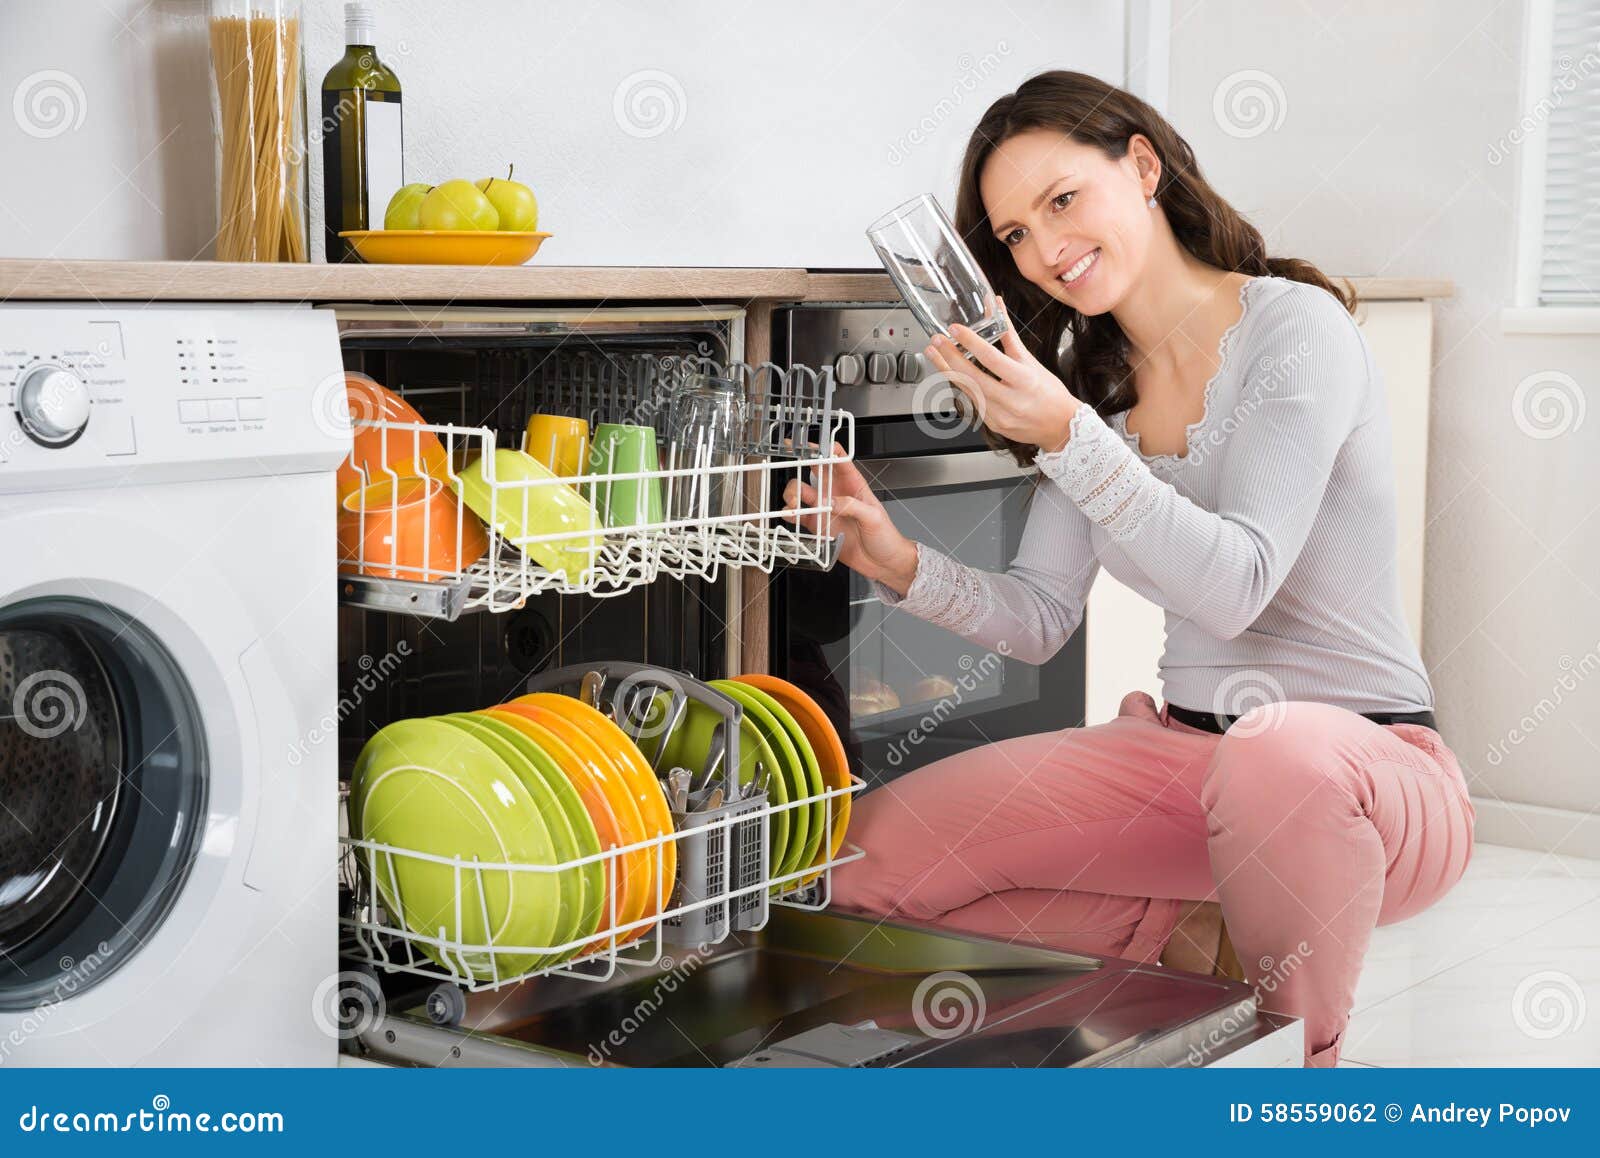 woman taking drinking glass from dishwasher